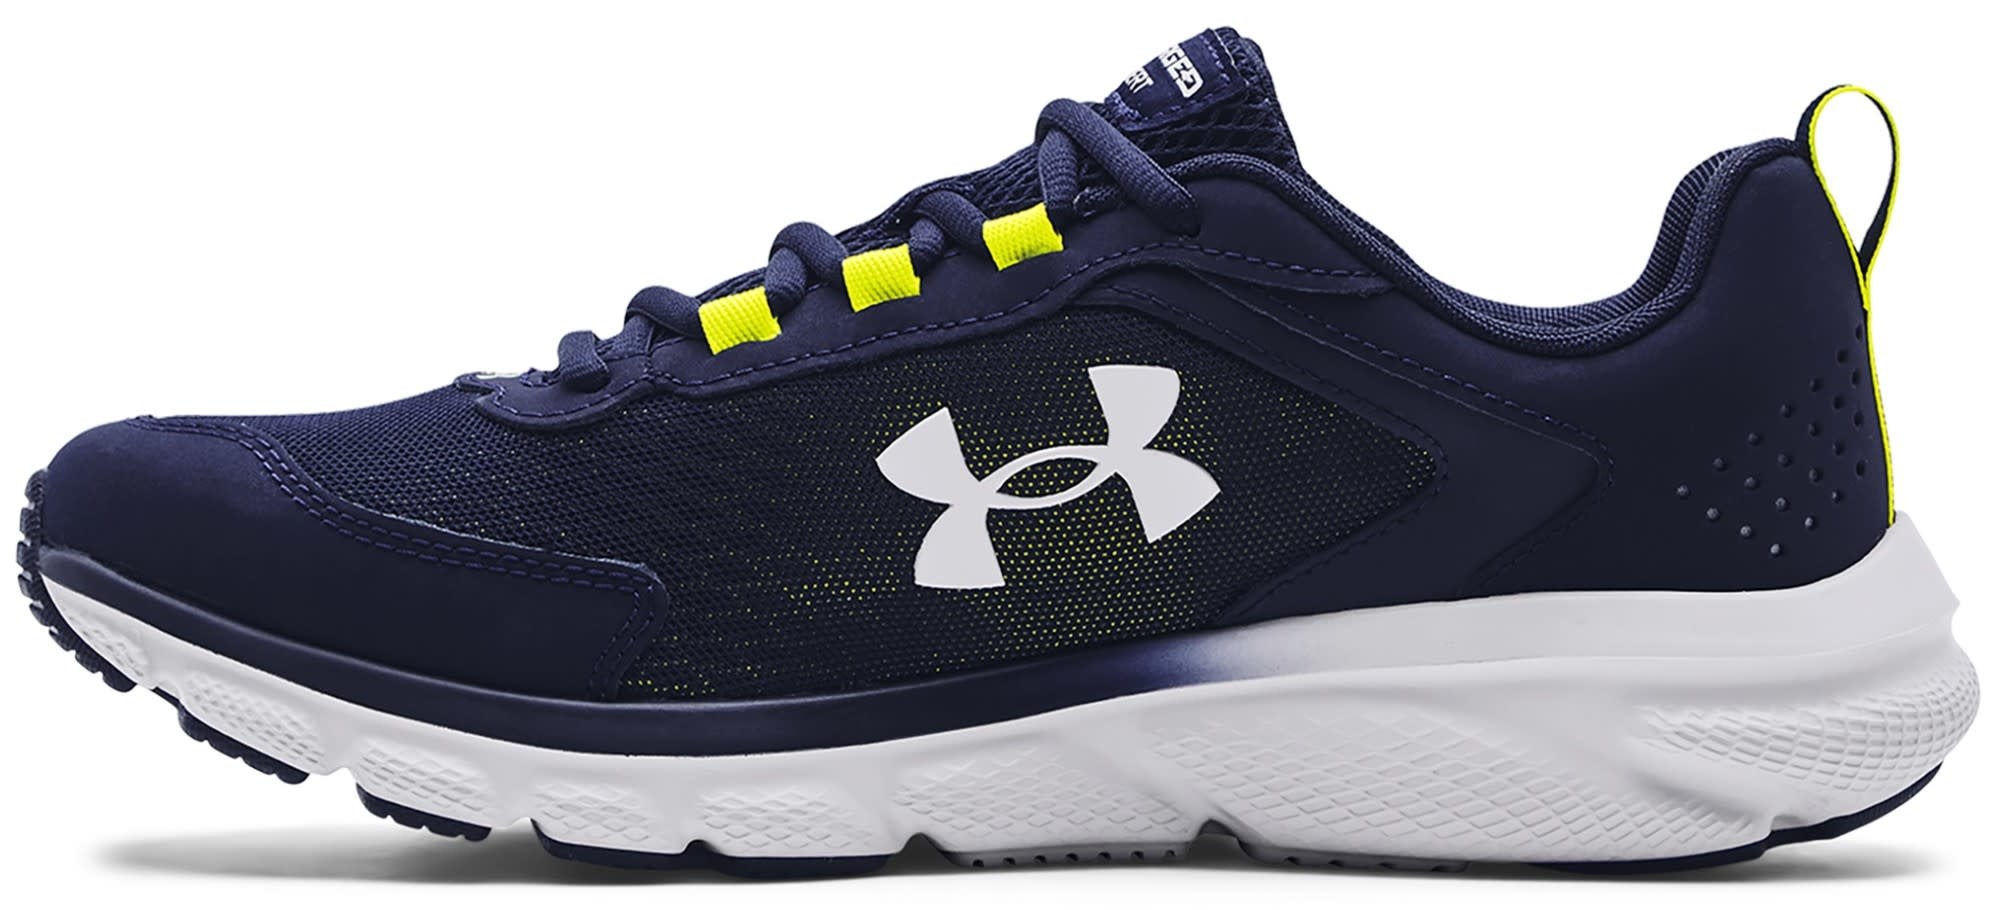 UNDER ARMOUR CHARGED ASSERT 9 NAVY/YELLOW - Laura-Jo Shoes